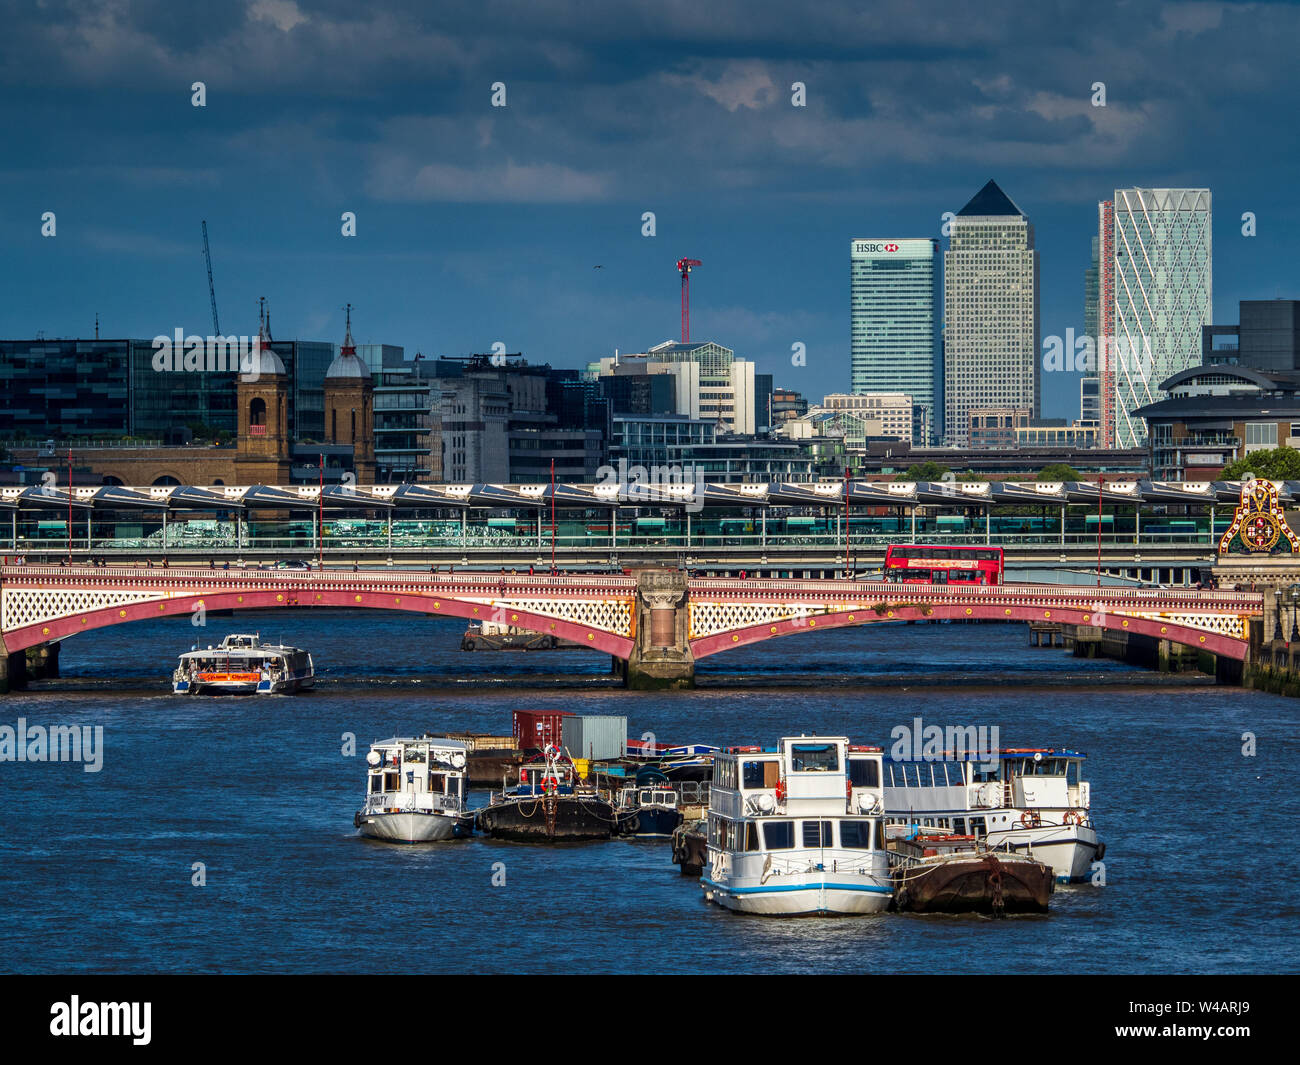 Canary Wharf London against dark skies. Canary Wharf view from Central London with Blackfriars Bridge in the foreground Stock Photo